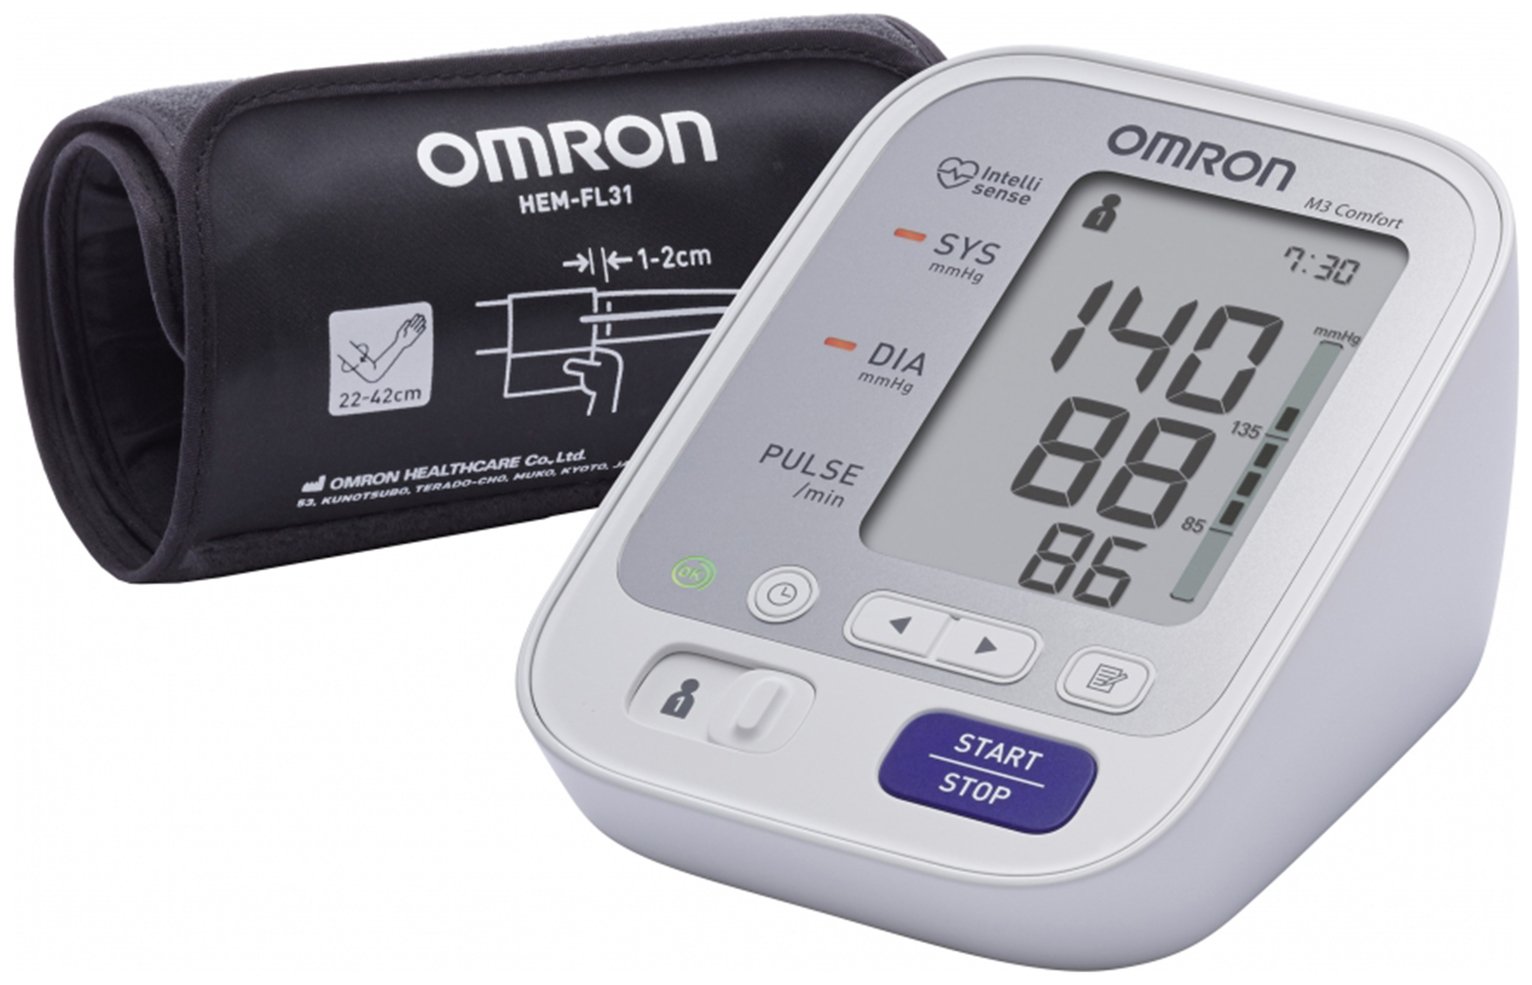 OMRON M3 Comfort Upper Arm Blood Pressure Monitor review